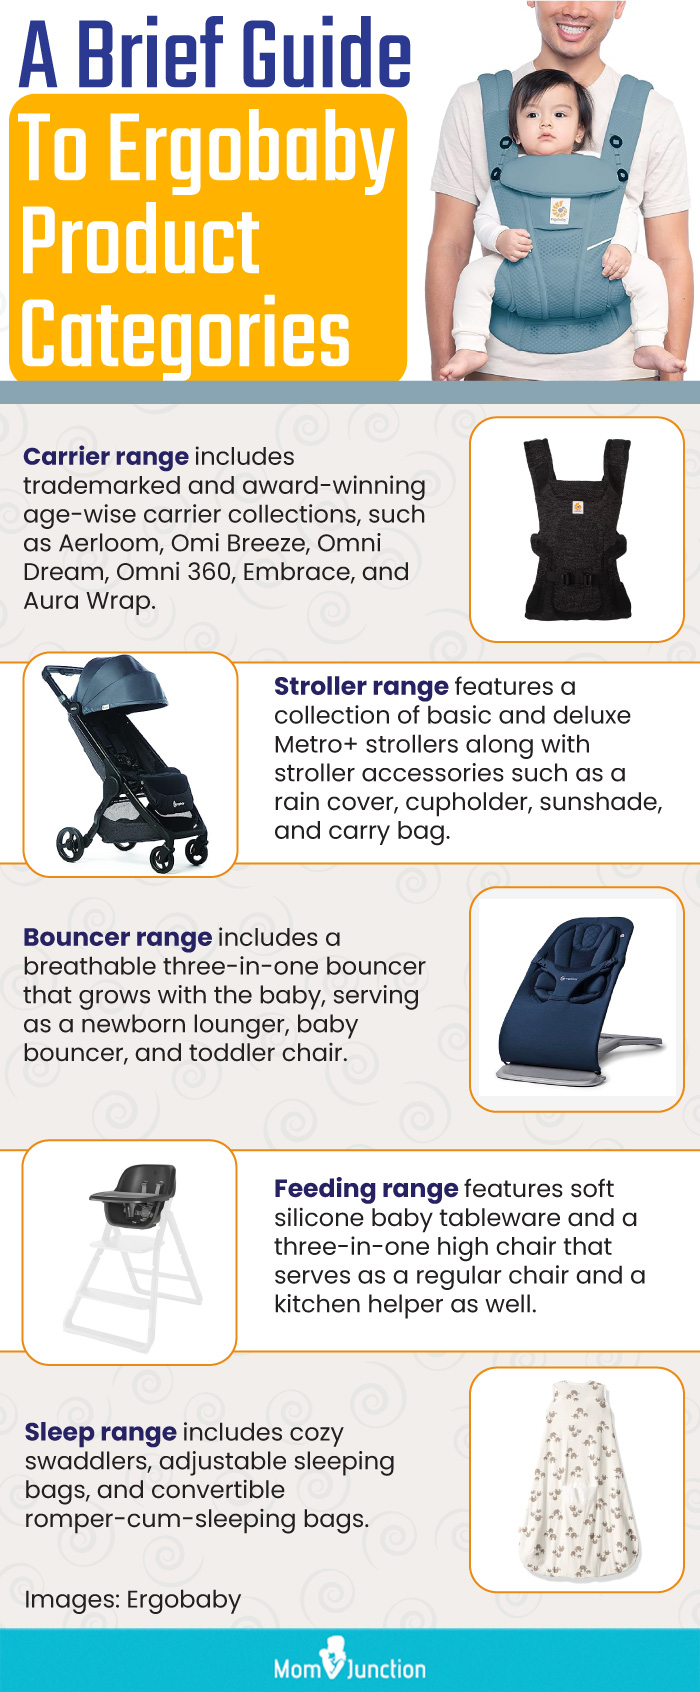 A Brief Guide To Ergobaby Product Categories (infographic)